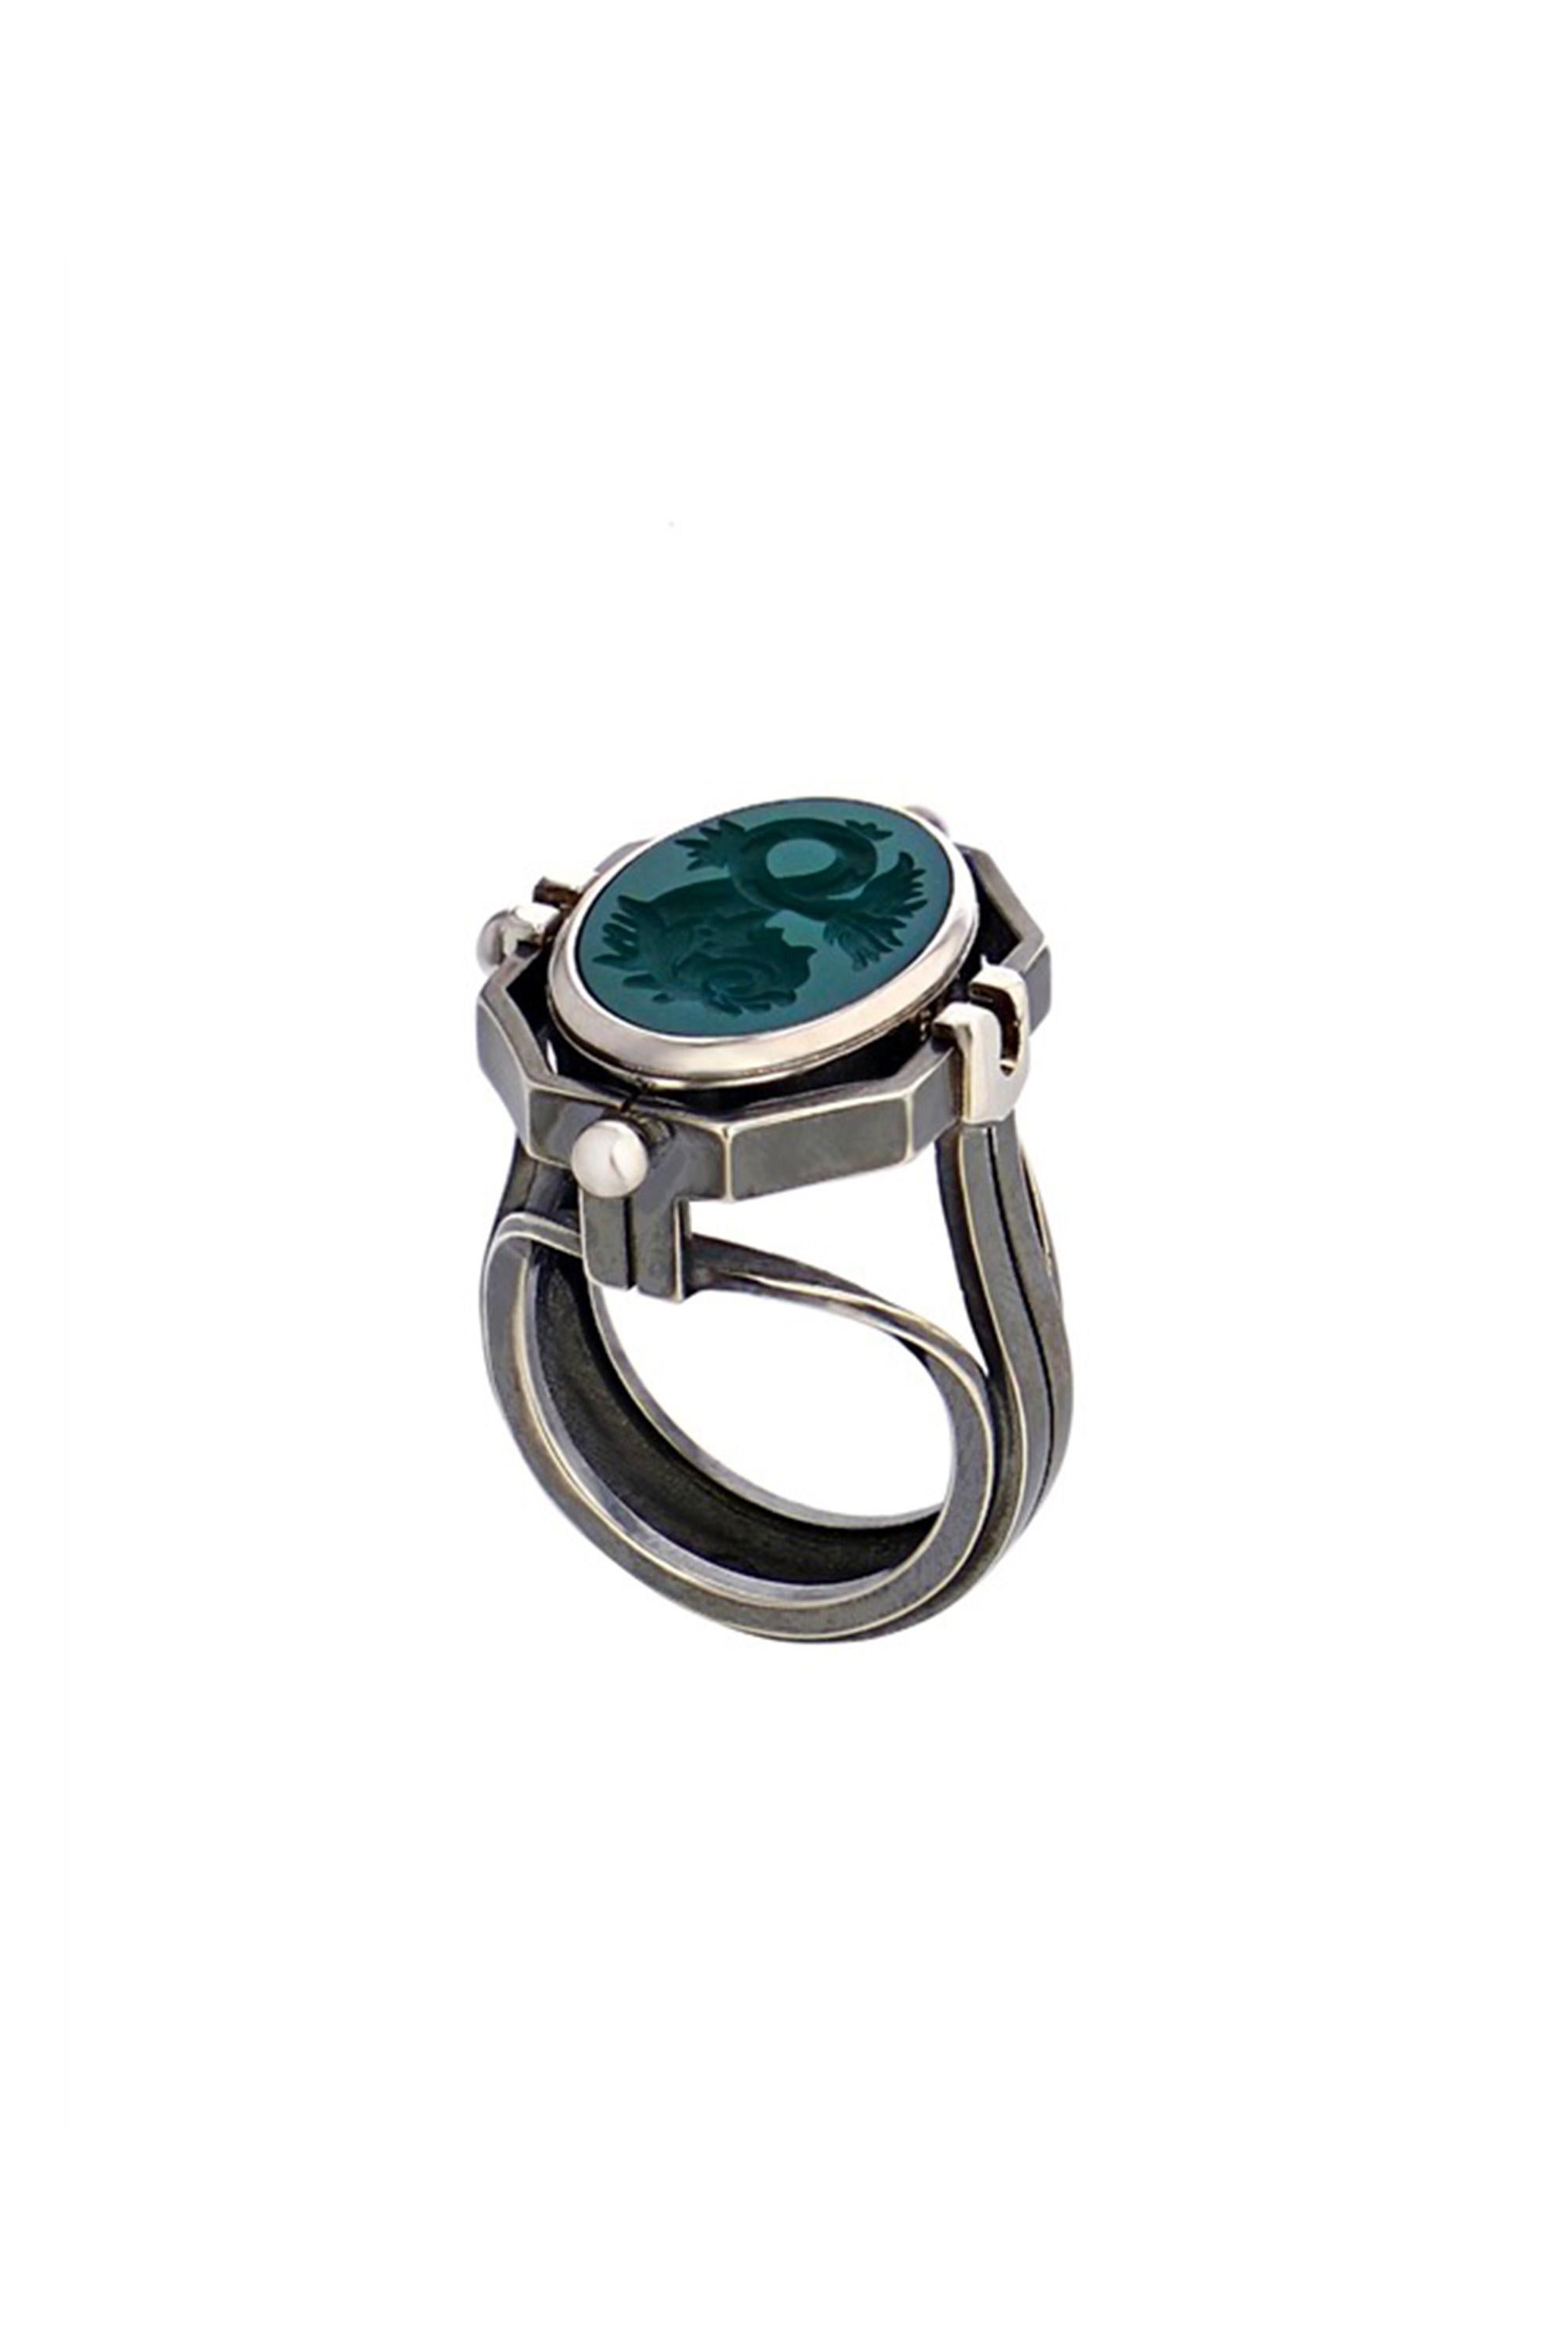 White gold and distressed silver ring. Rotating medallion: on the gold side are engraved Water signs (Cancer, Scorpio, Pisces) and on a green agate, a fish.

Details: 
Green Agate 
3 Diamonds: 0.06 cts
18k White Gold: 10g
Distressed Silver: 8g
Made